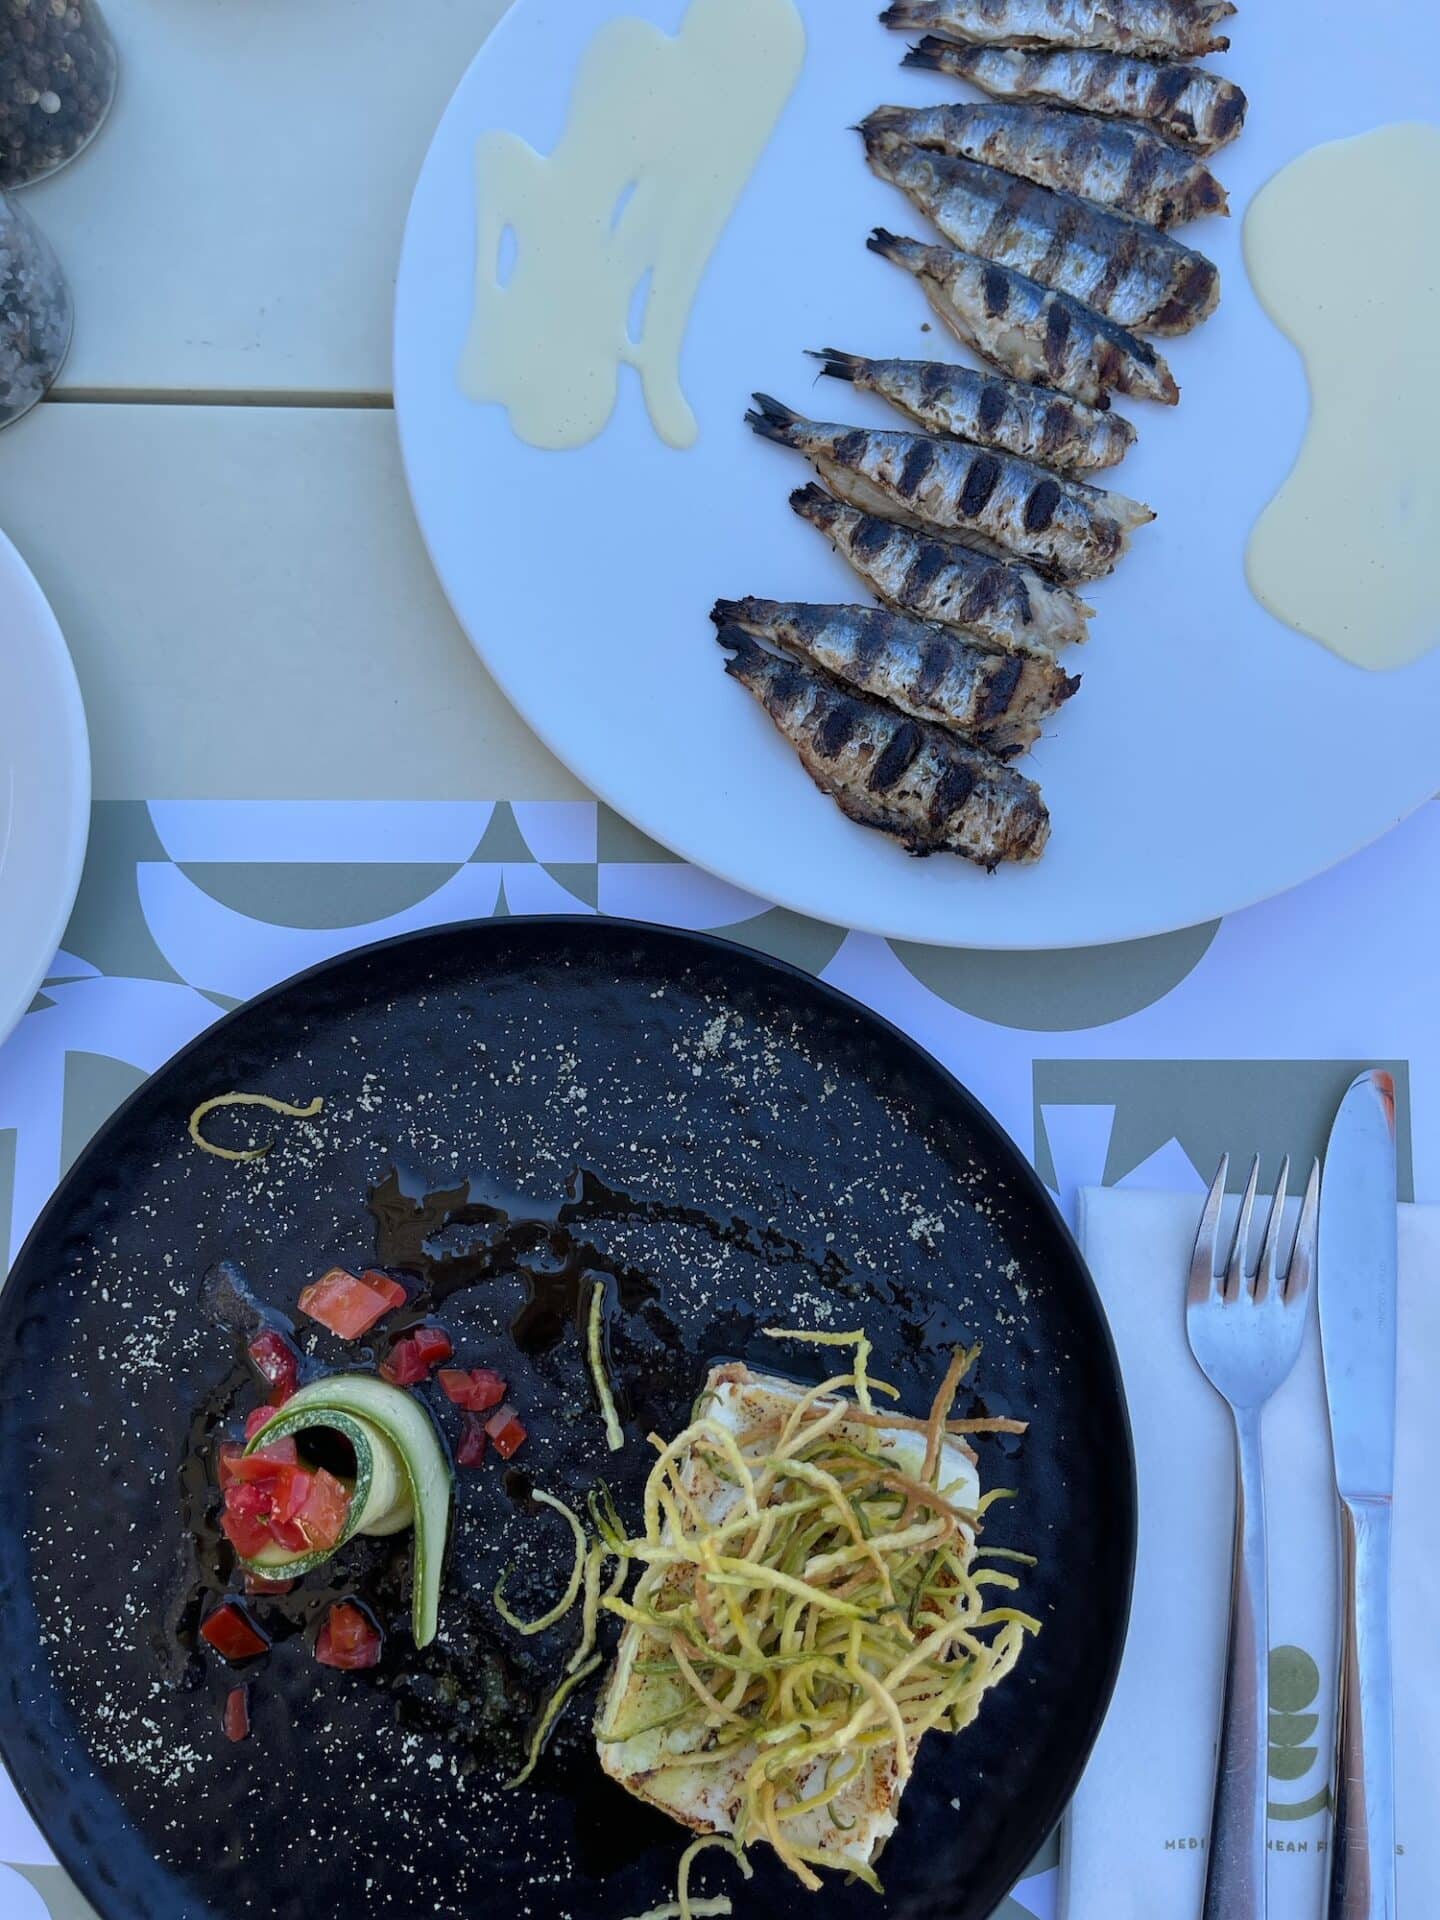 An overhead view of a Greek meal featuring grilled fish on a black plate, pasta, and two artistic splashes of sauce on a white plate, typical cuisine in Milos.